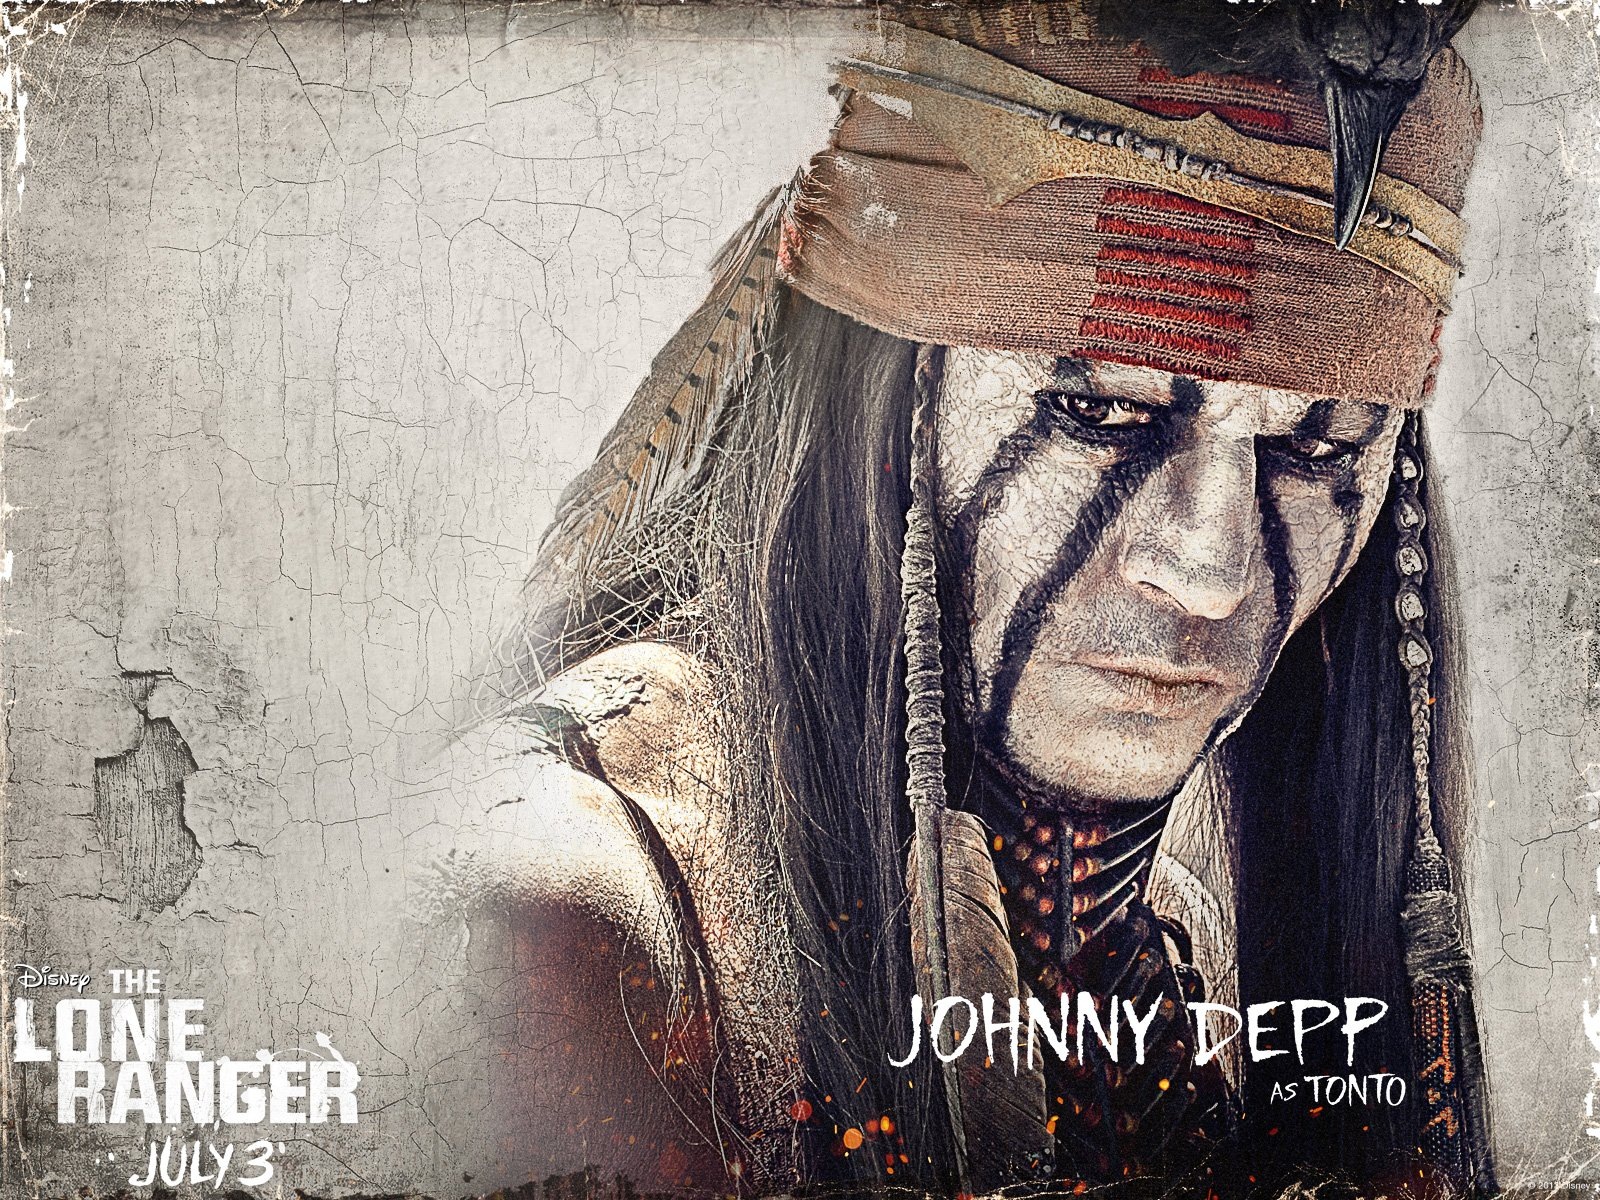 The Lone Ranger HD movie wallpapers #9 - 1600x1200